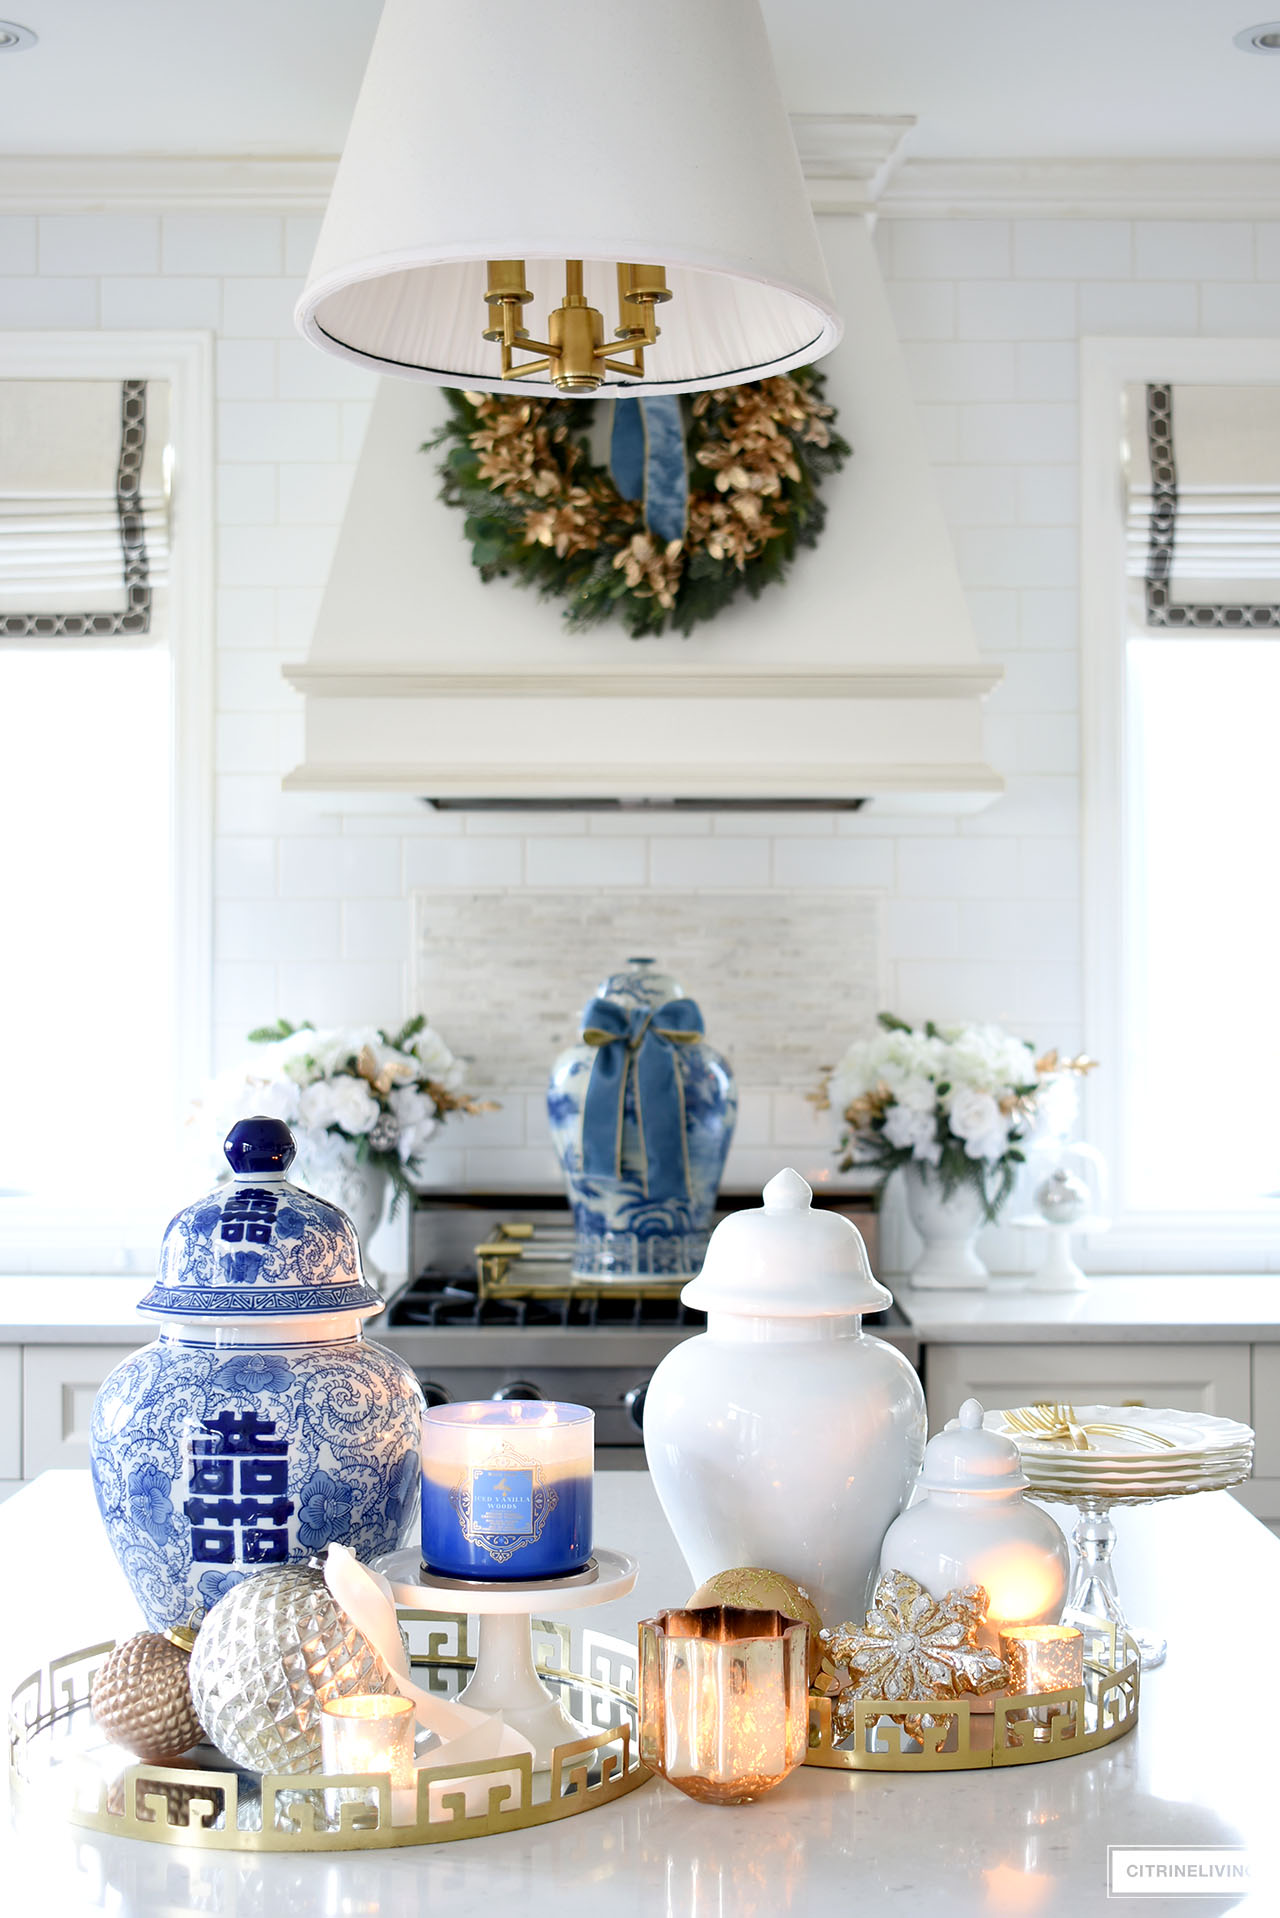 Kitchen island styled for Christmas with ginger jars, candles, ornaments and dishes on beautiful gold trays.